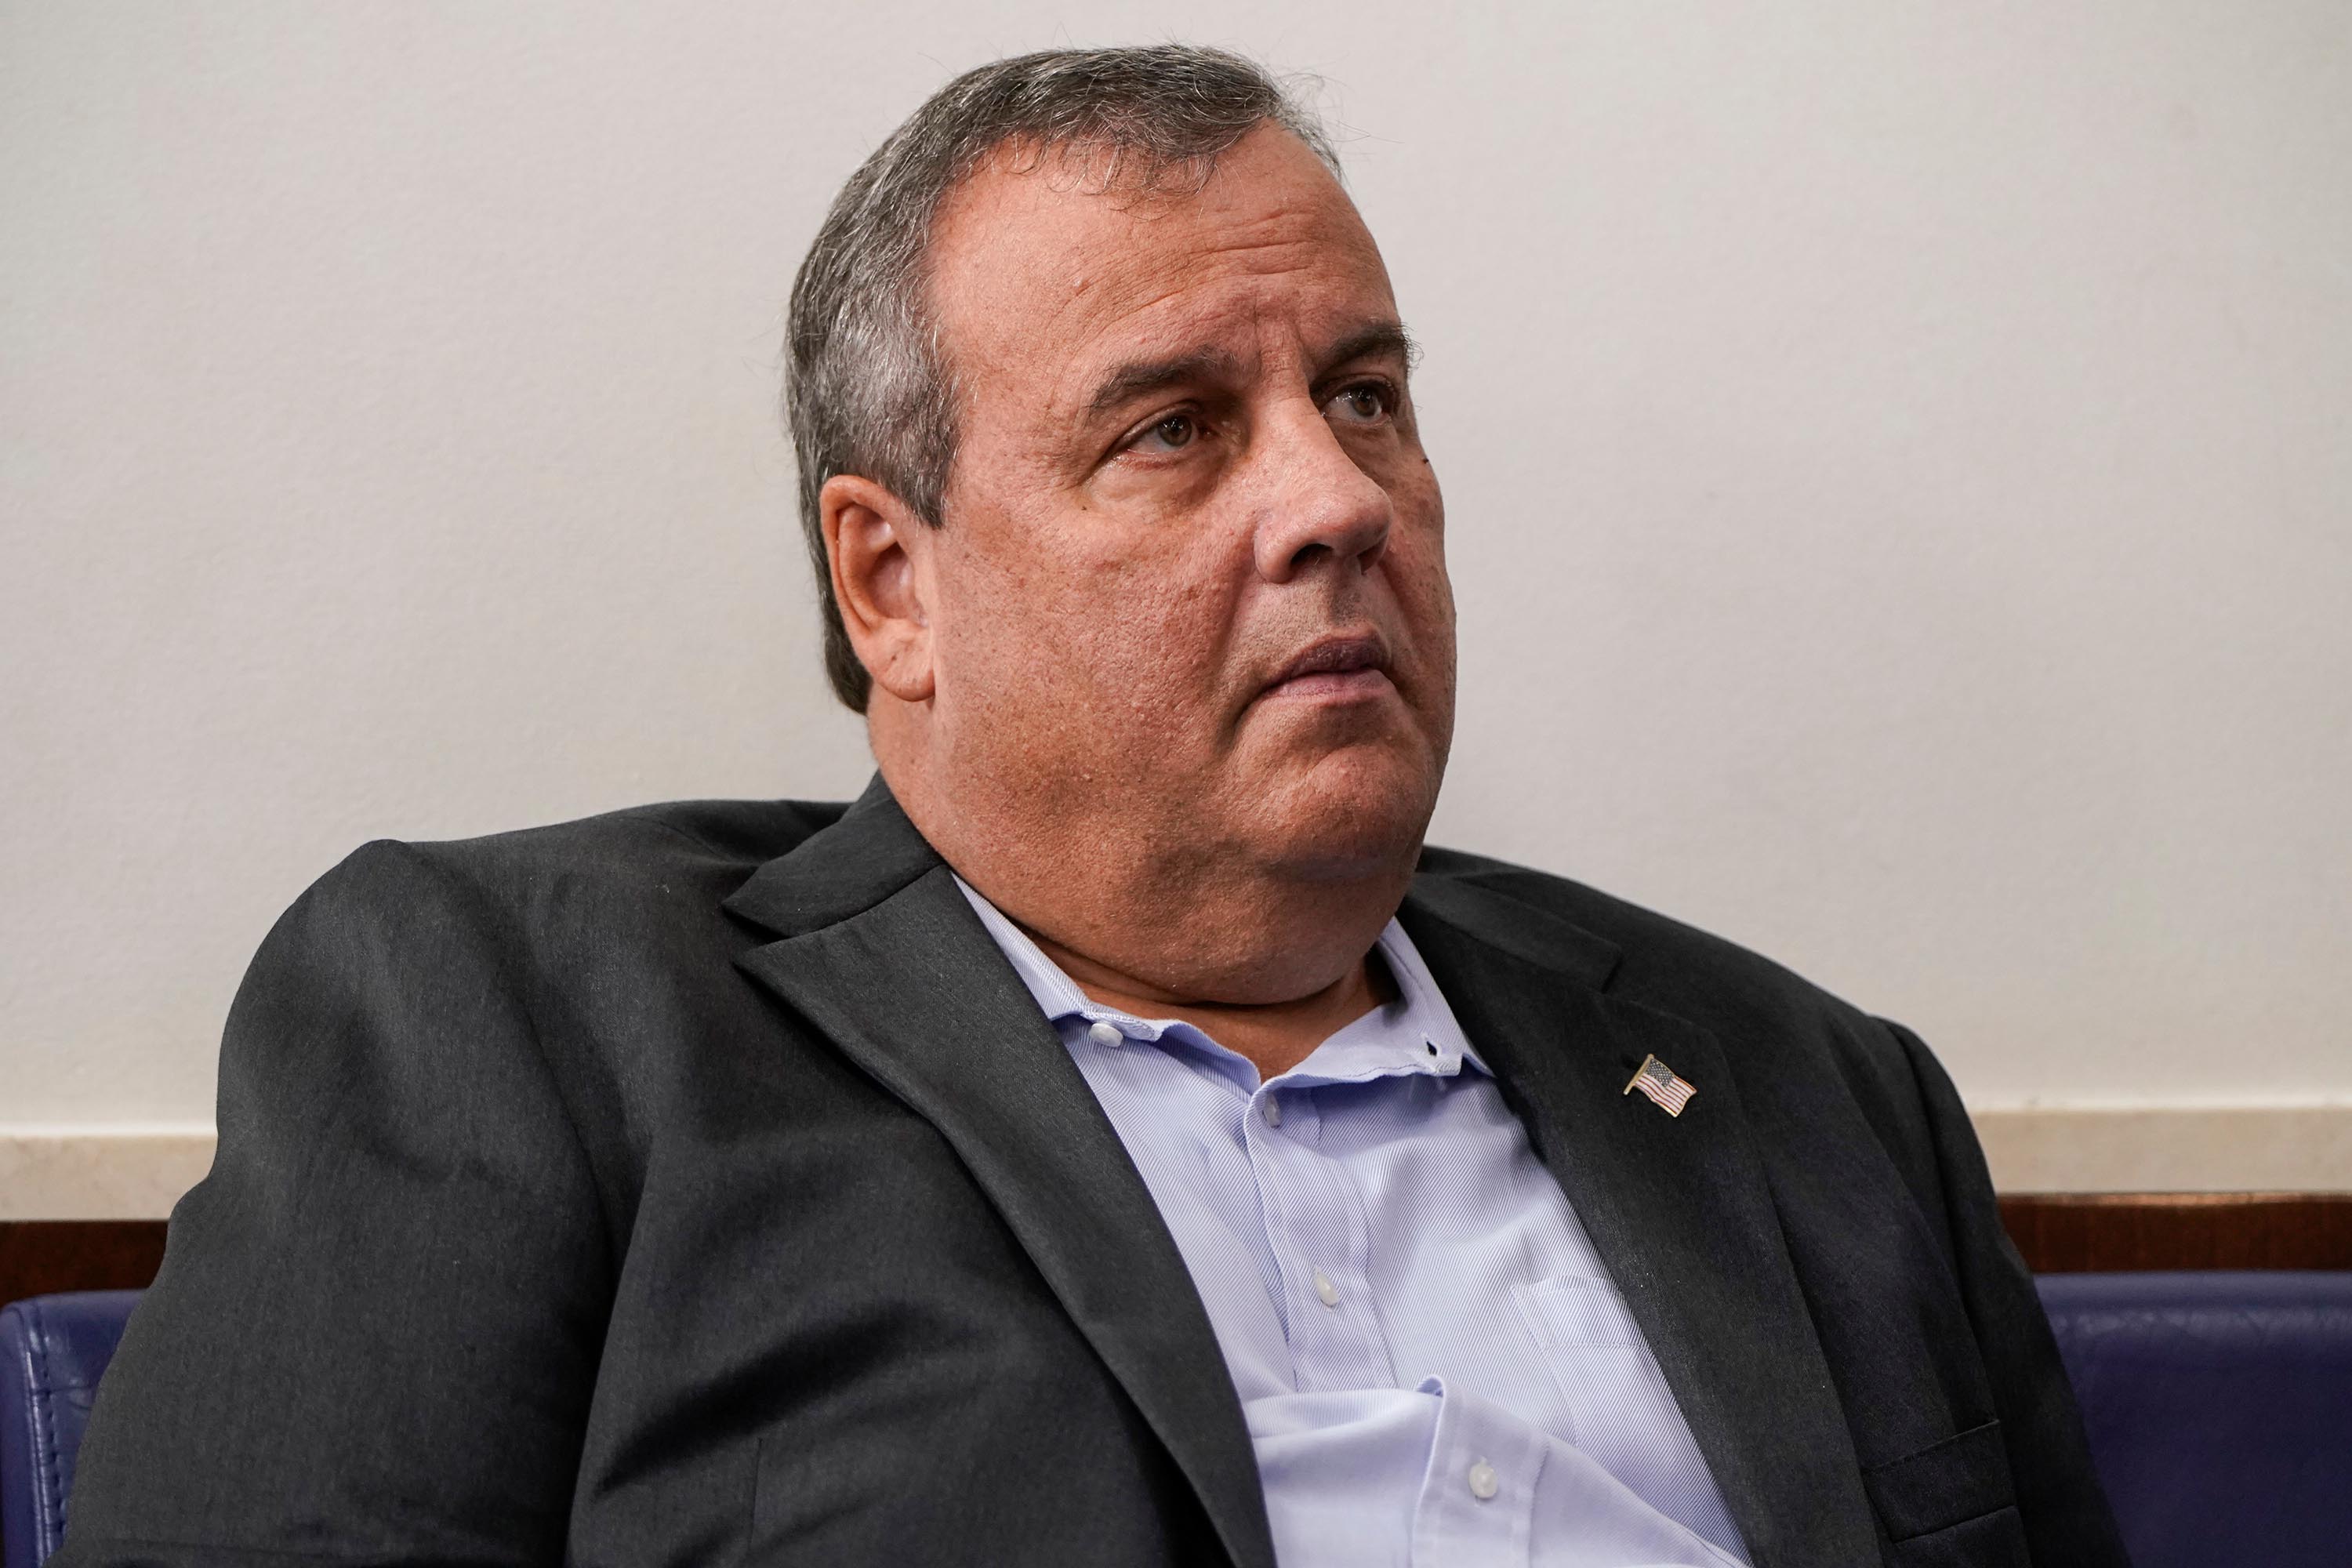 Former New Jersey Governor Chris Christie listens as President Donald Trump speaks during a news conference at the White House on September 27.